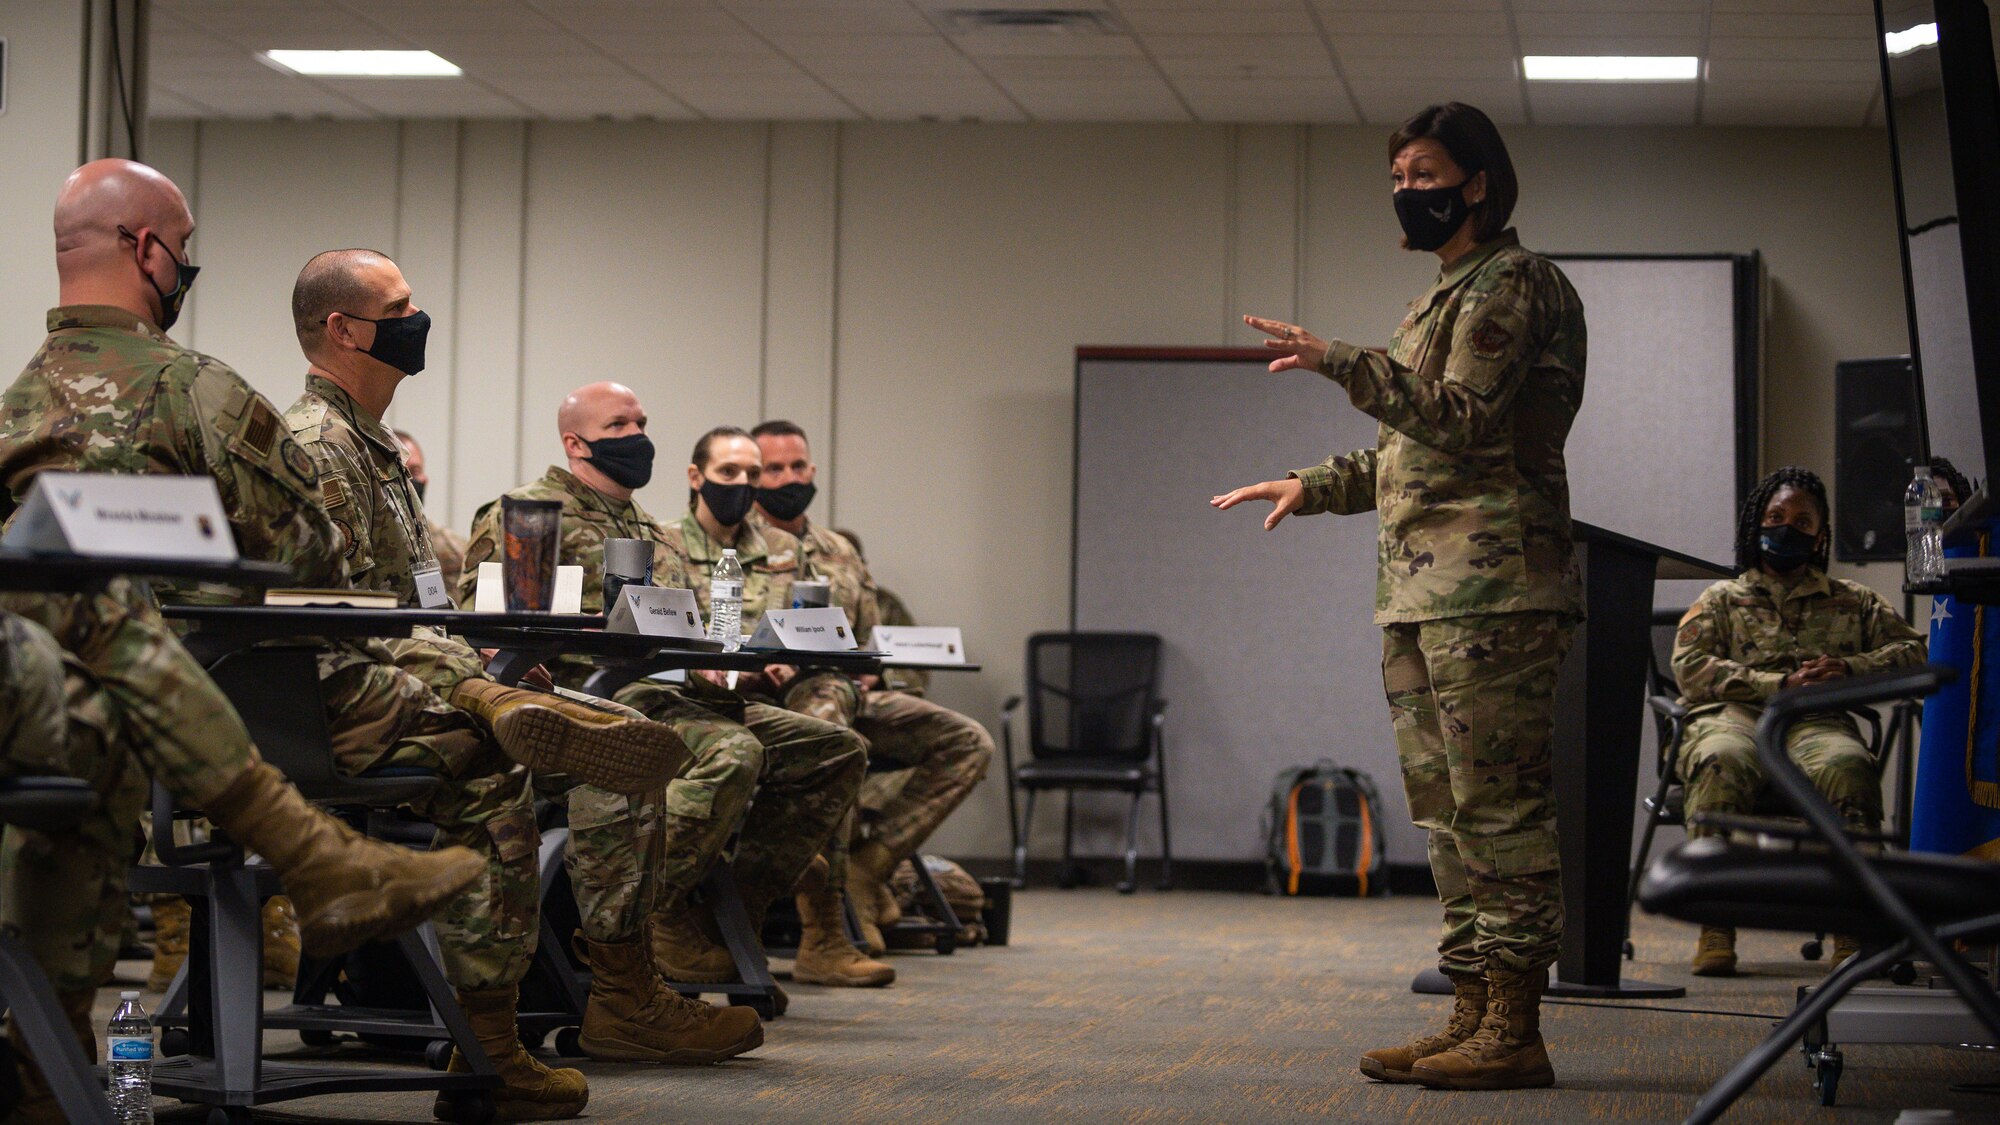 Chief Master Sergeant of the Air Force JoAnne S. Bass, addresses the crowd at Air Force Global Strike Command’s chief orientation course in Bossier City, Louisiana, April 21, 2021.